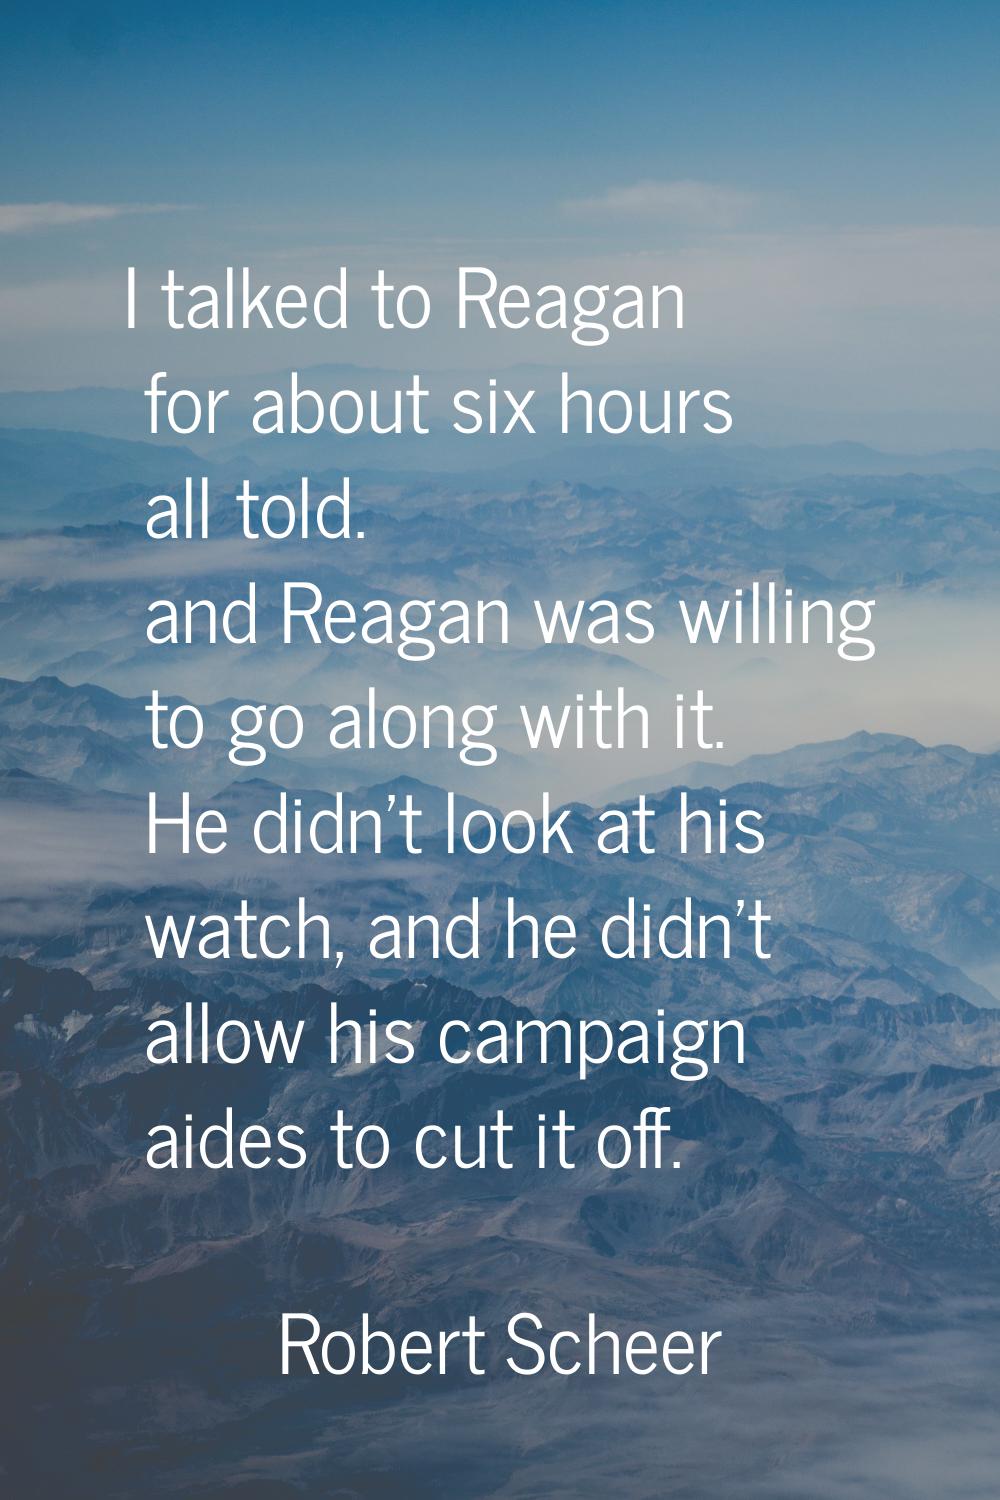 I talked to Reagan for about six hours all told. and Reagan was willing to go along with it. He did